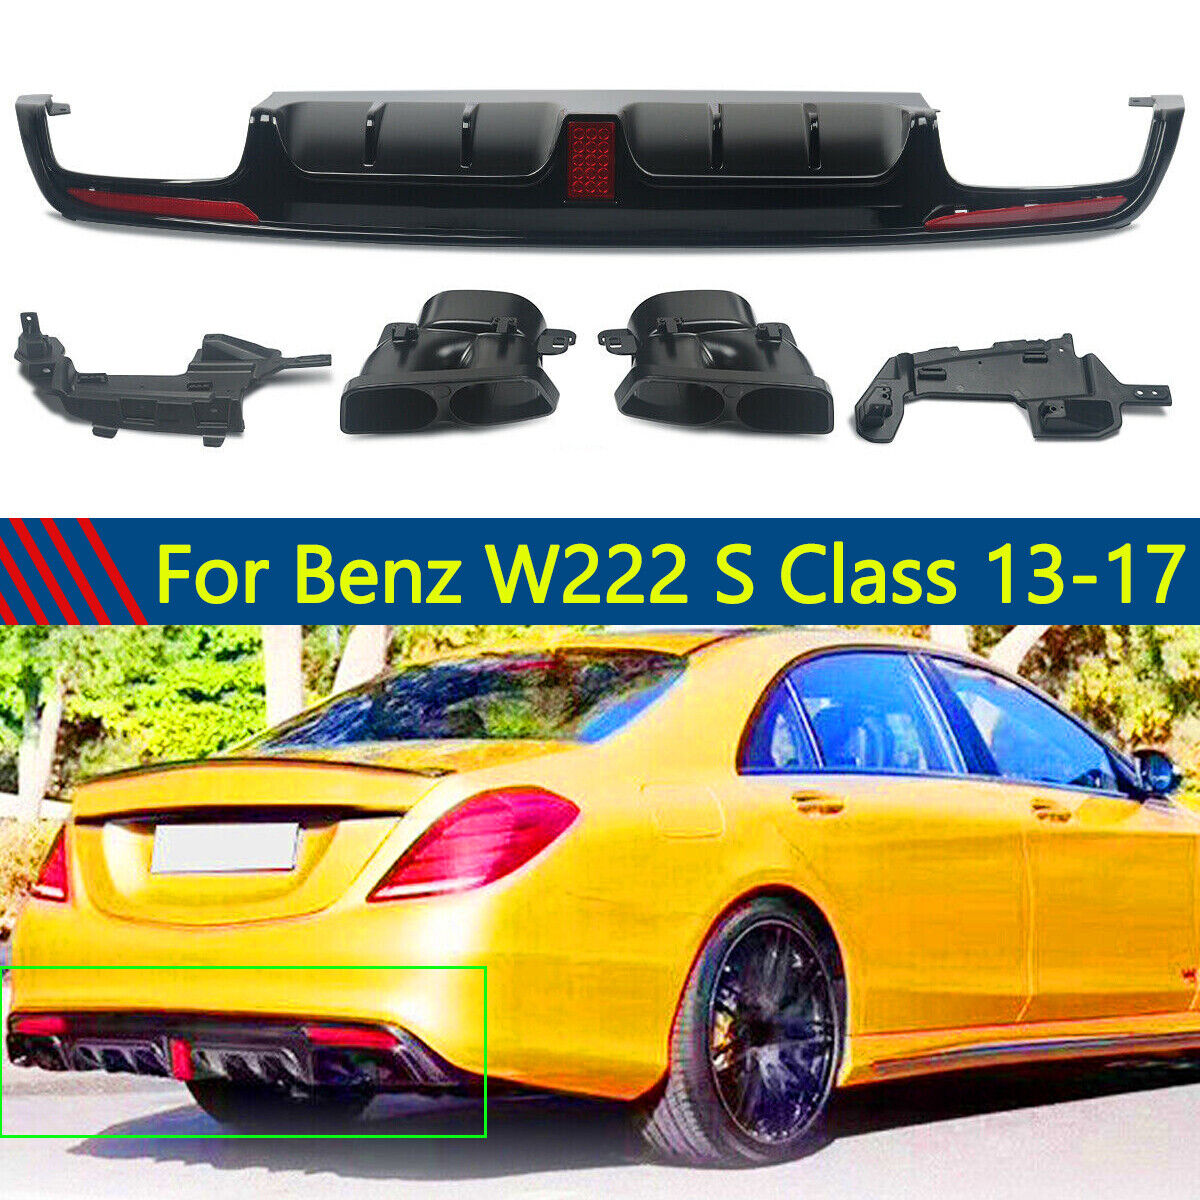 F1 Style Gloss Black Rear Diffuser W/Exhaust For Mercedes S Class W222 2013-2017